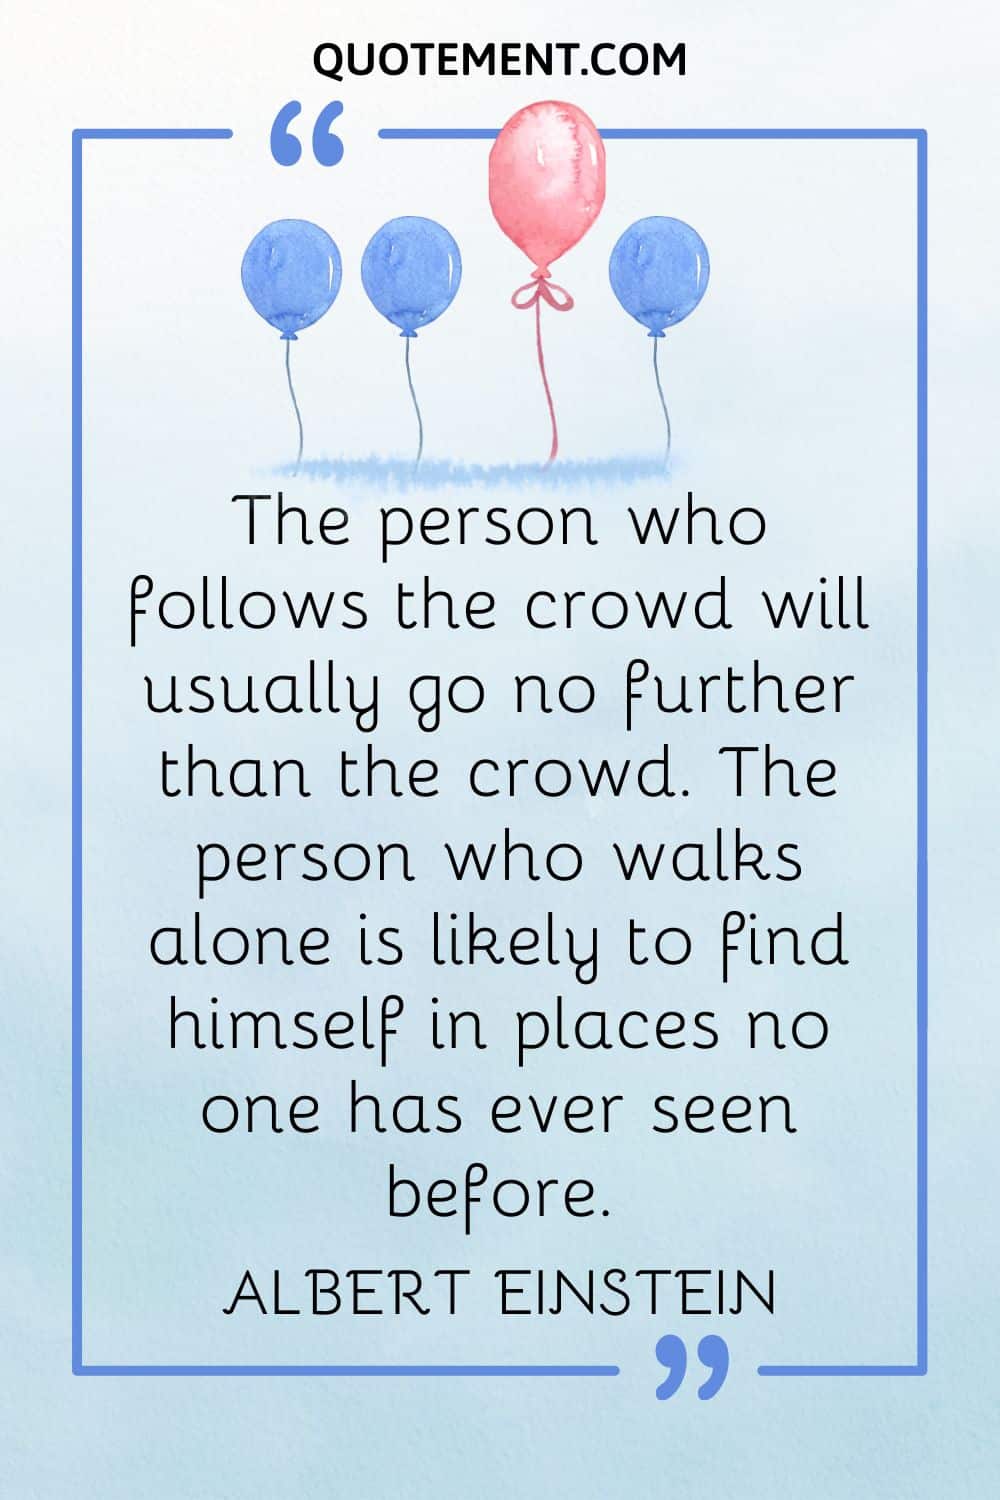 The person who follows the crowd will usually go no further than the crowd